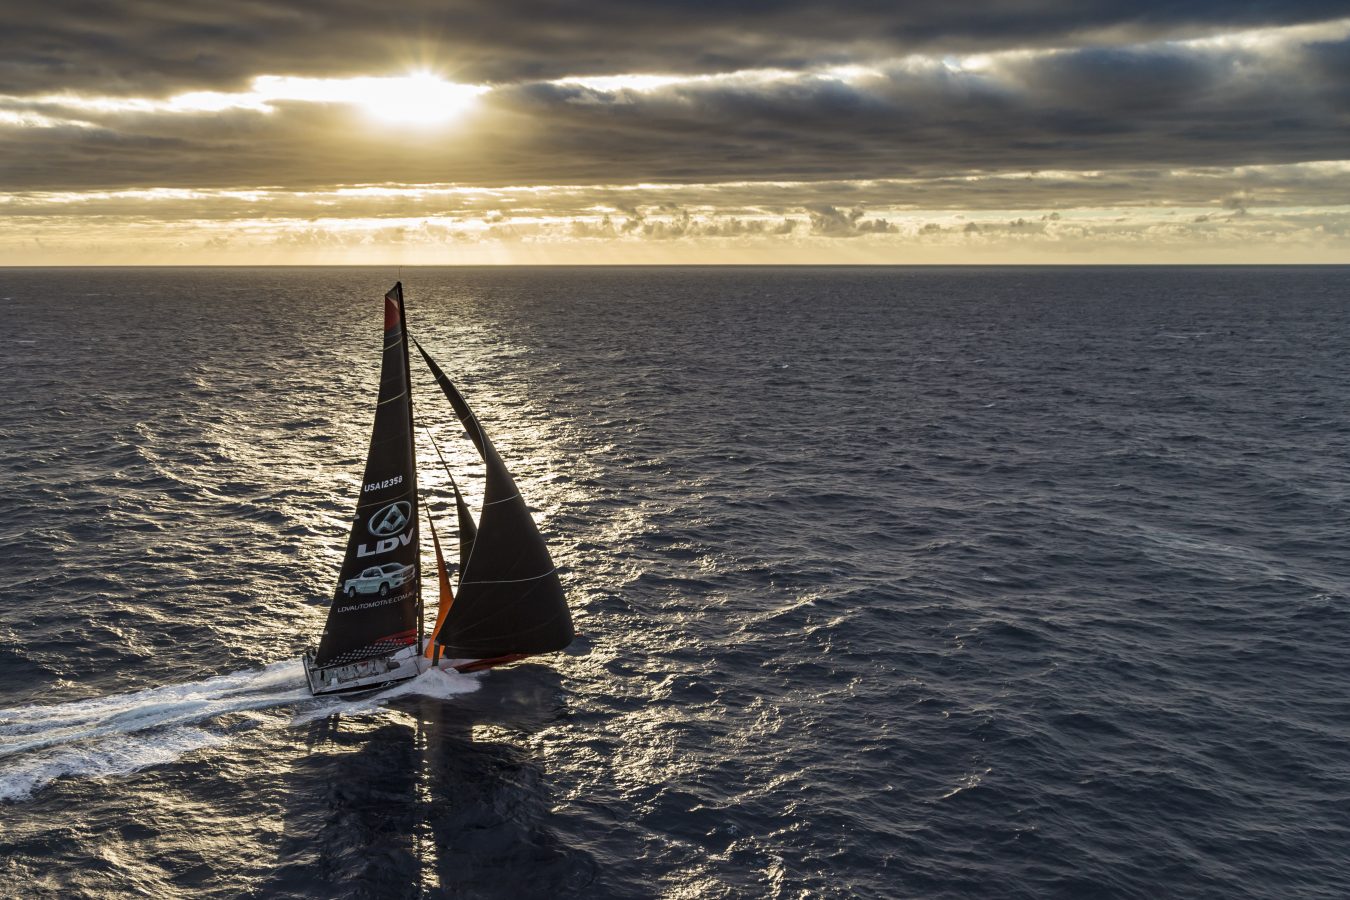 73rd SYDNEY TO HOBART: A YEAR LIKE NO OTHER